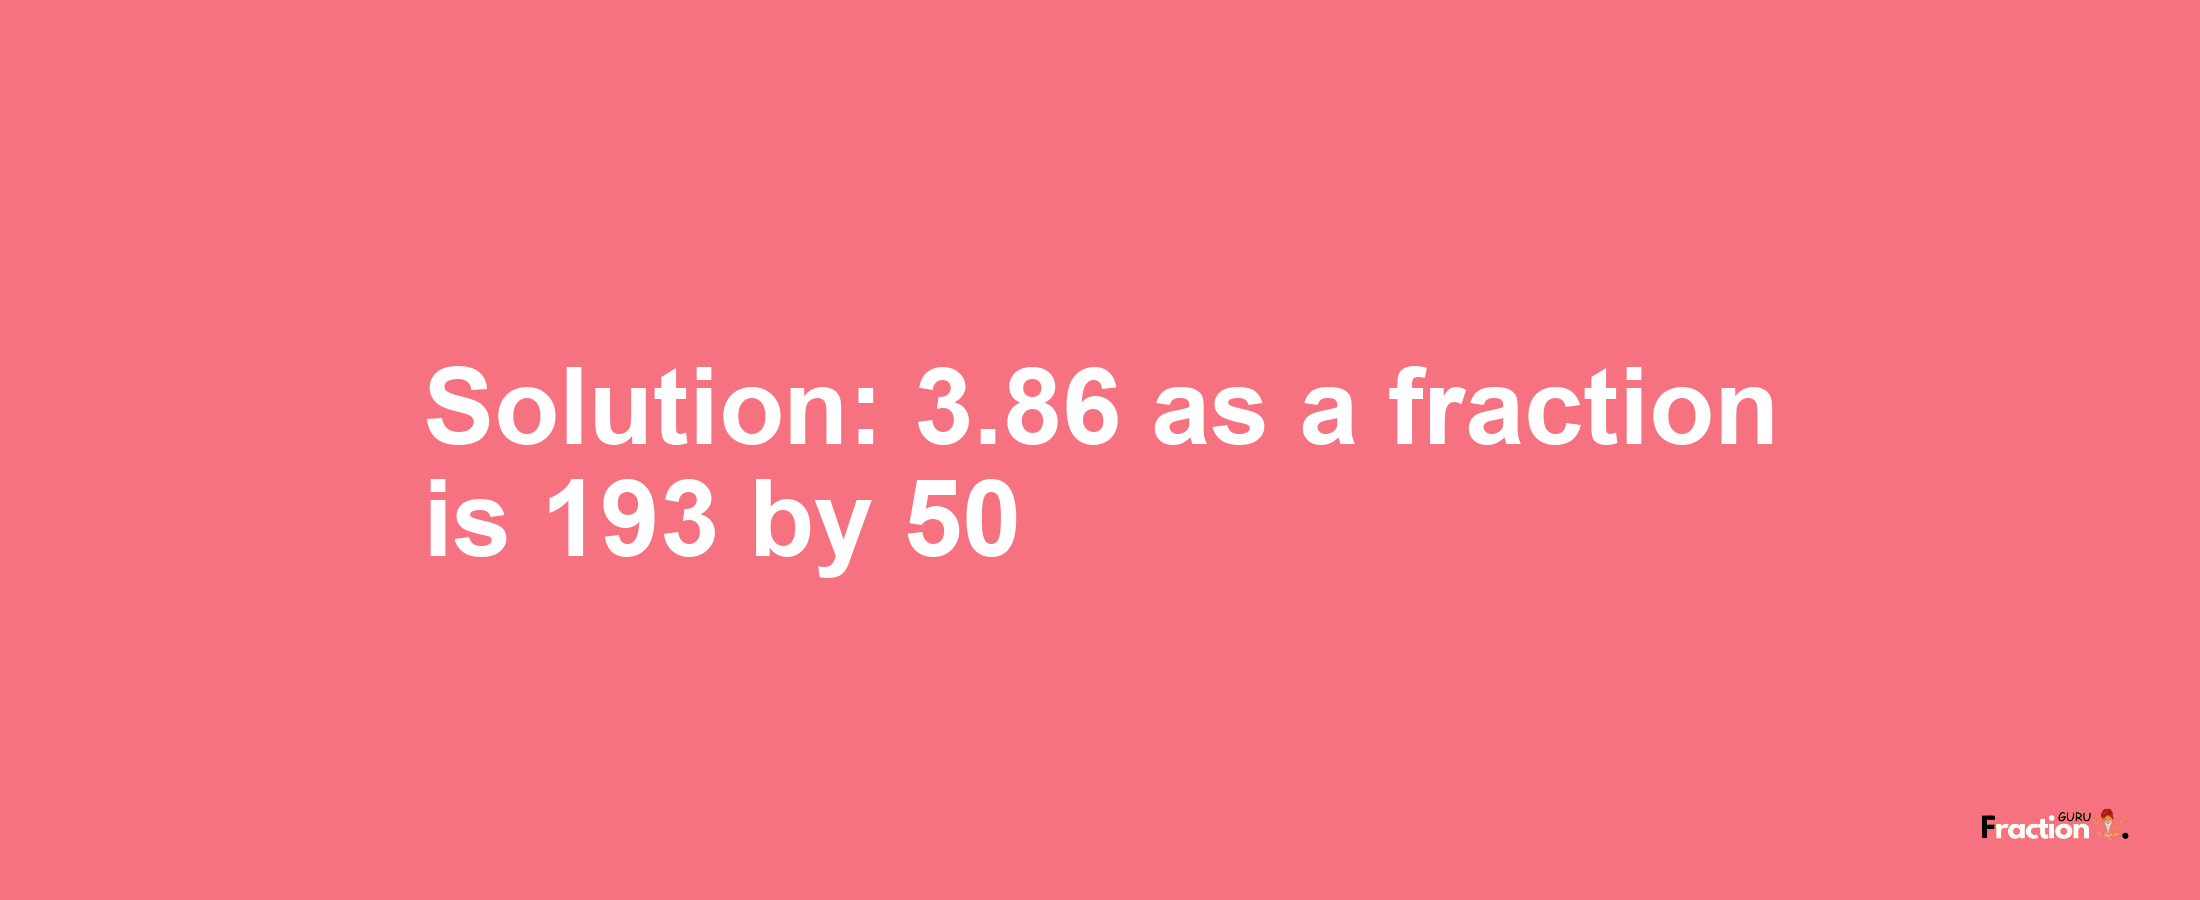 Solution:3.86 as a fraction is 193/50